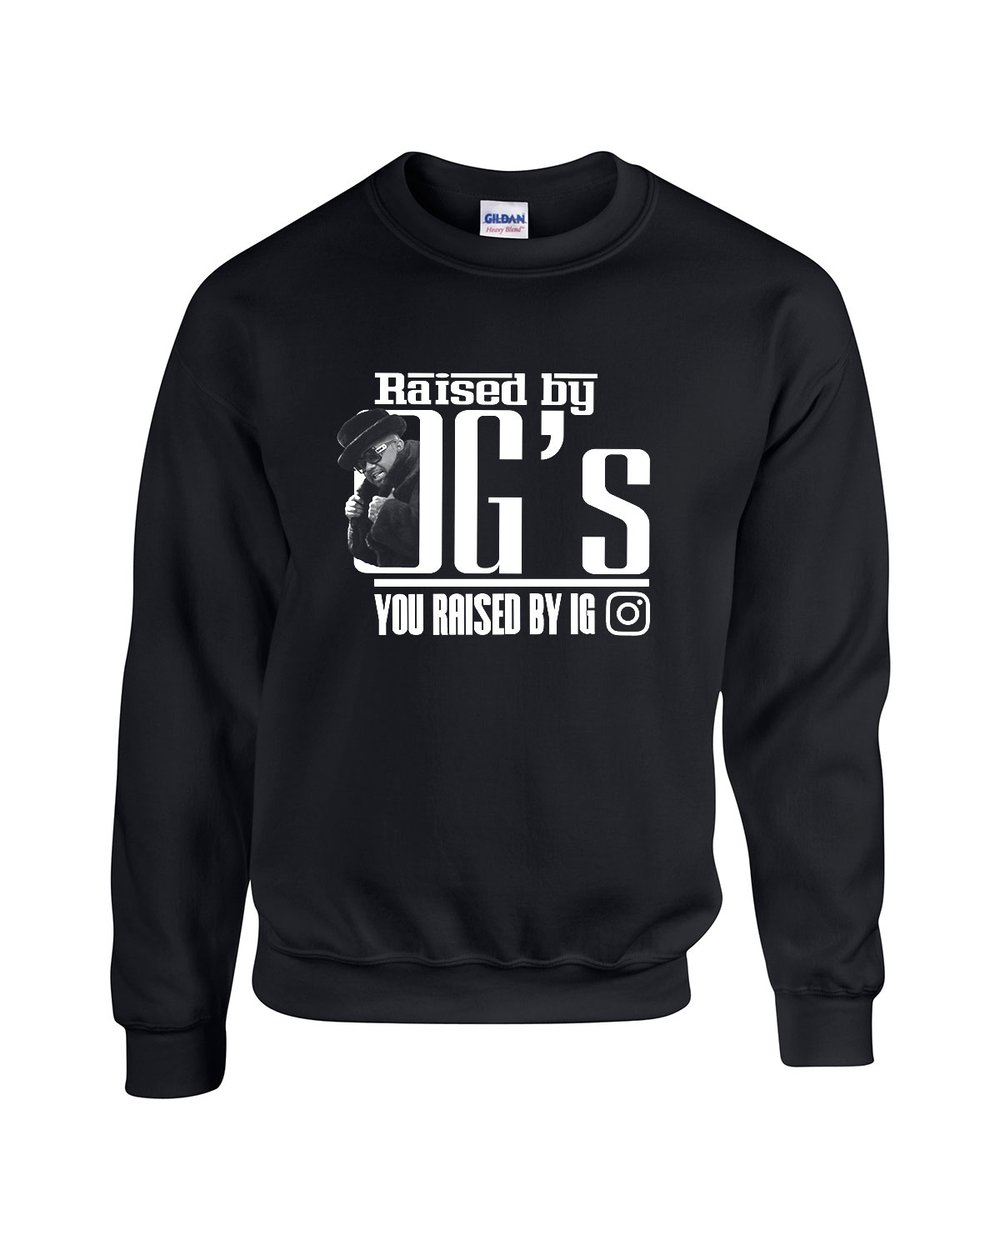 I was raised by OGs You were raised by IG (crew neck)